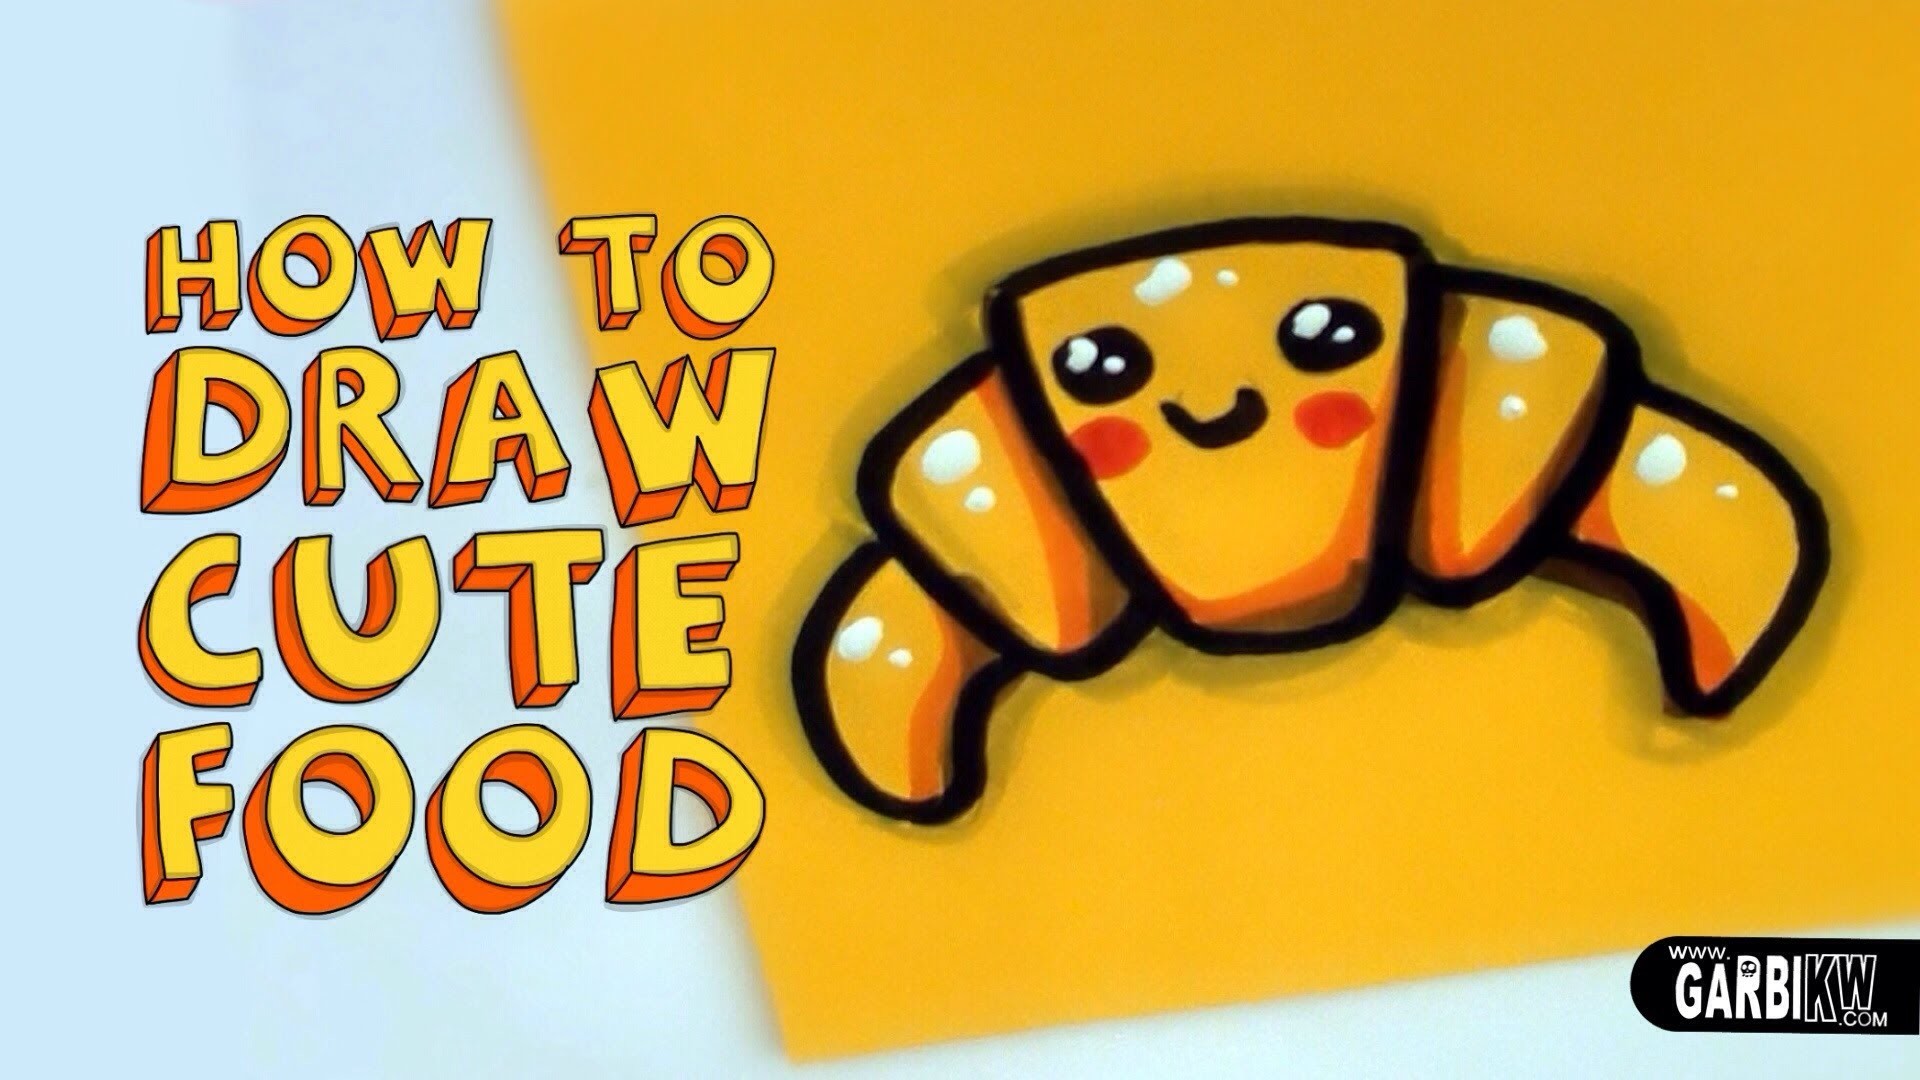 1920x1080 How To Draw a Cute Croissant - Kawaii Food - Easy Drawings by Garbi KW